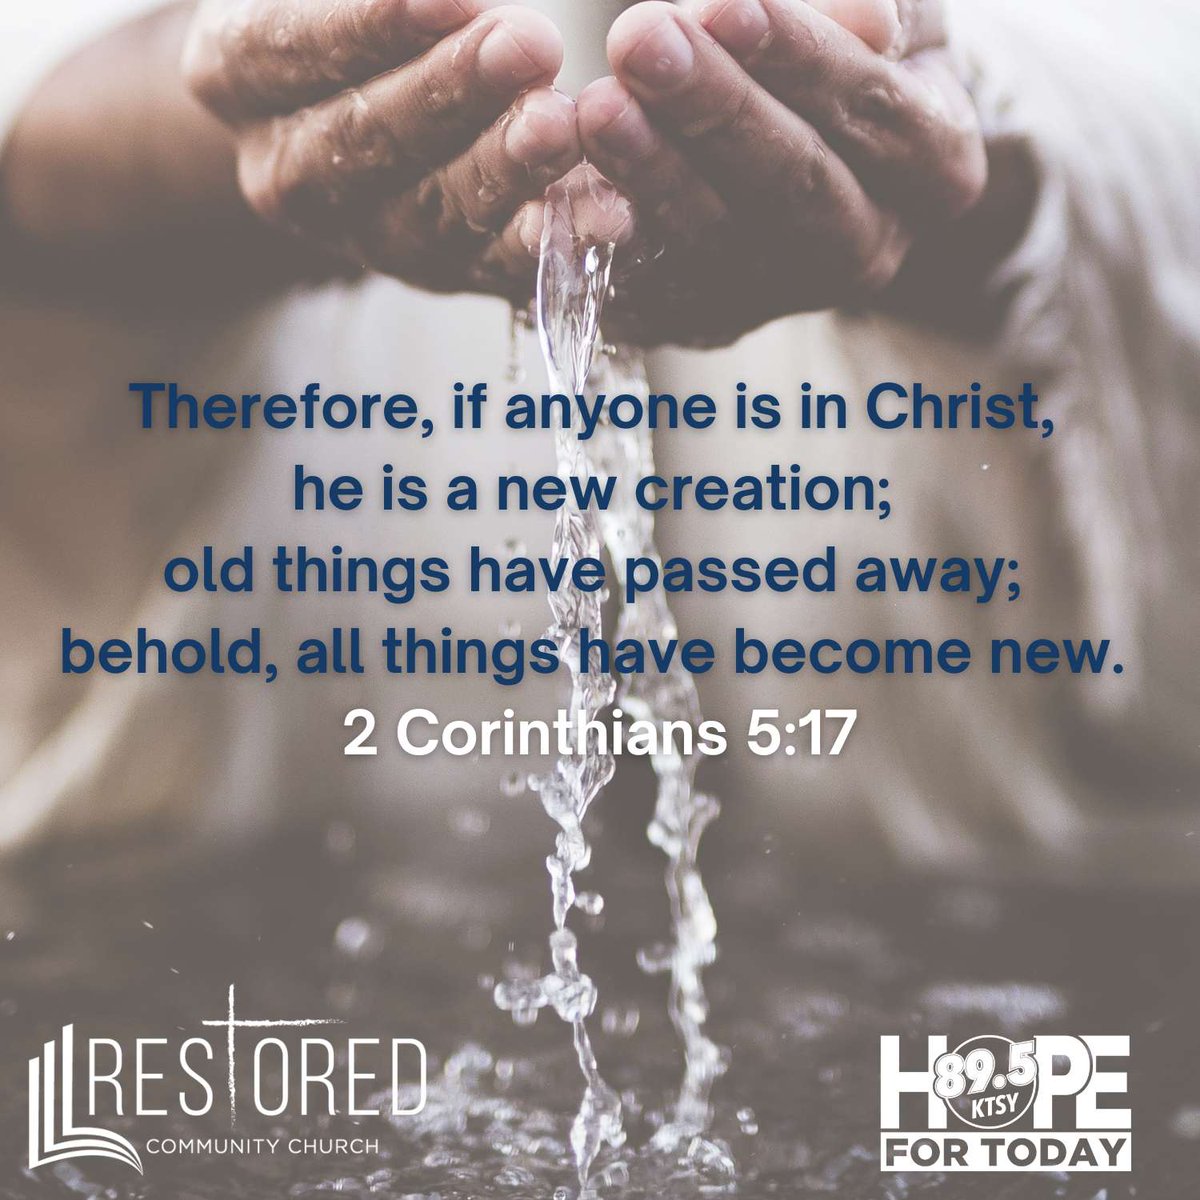 You are a new creation in Christ. #hopefortoday #choosehope #bible #scripture